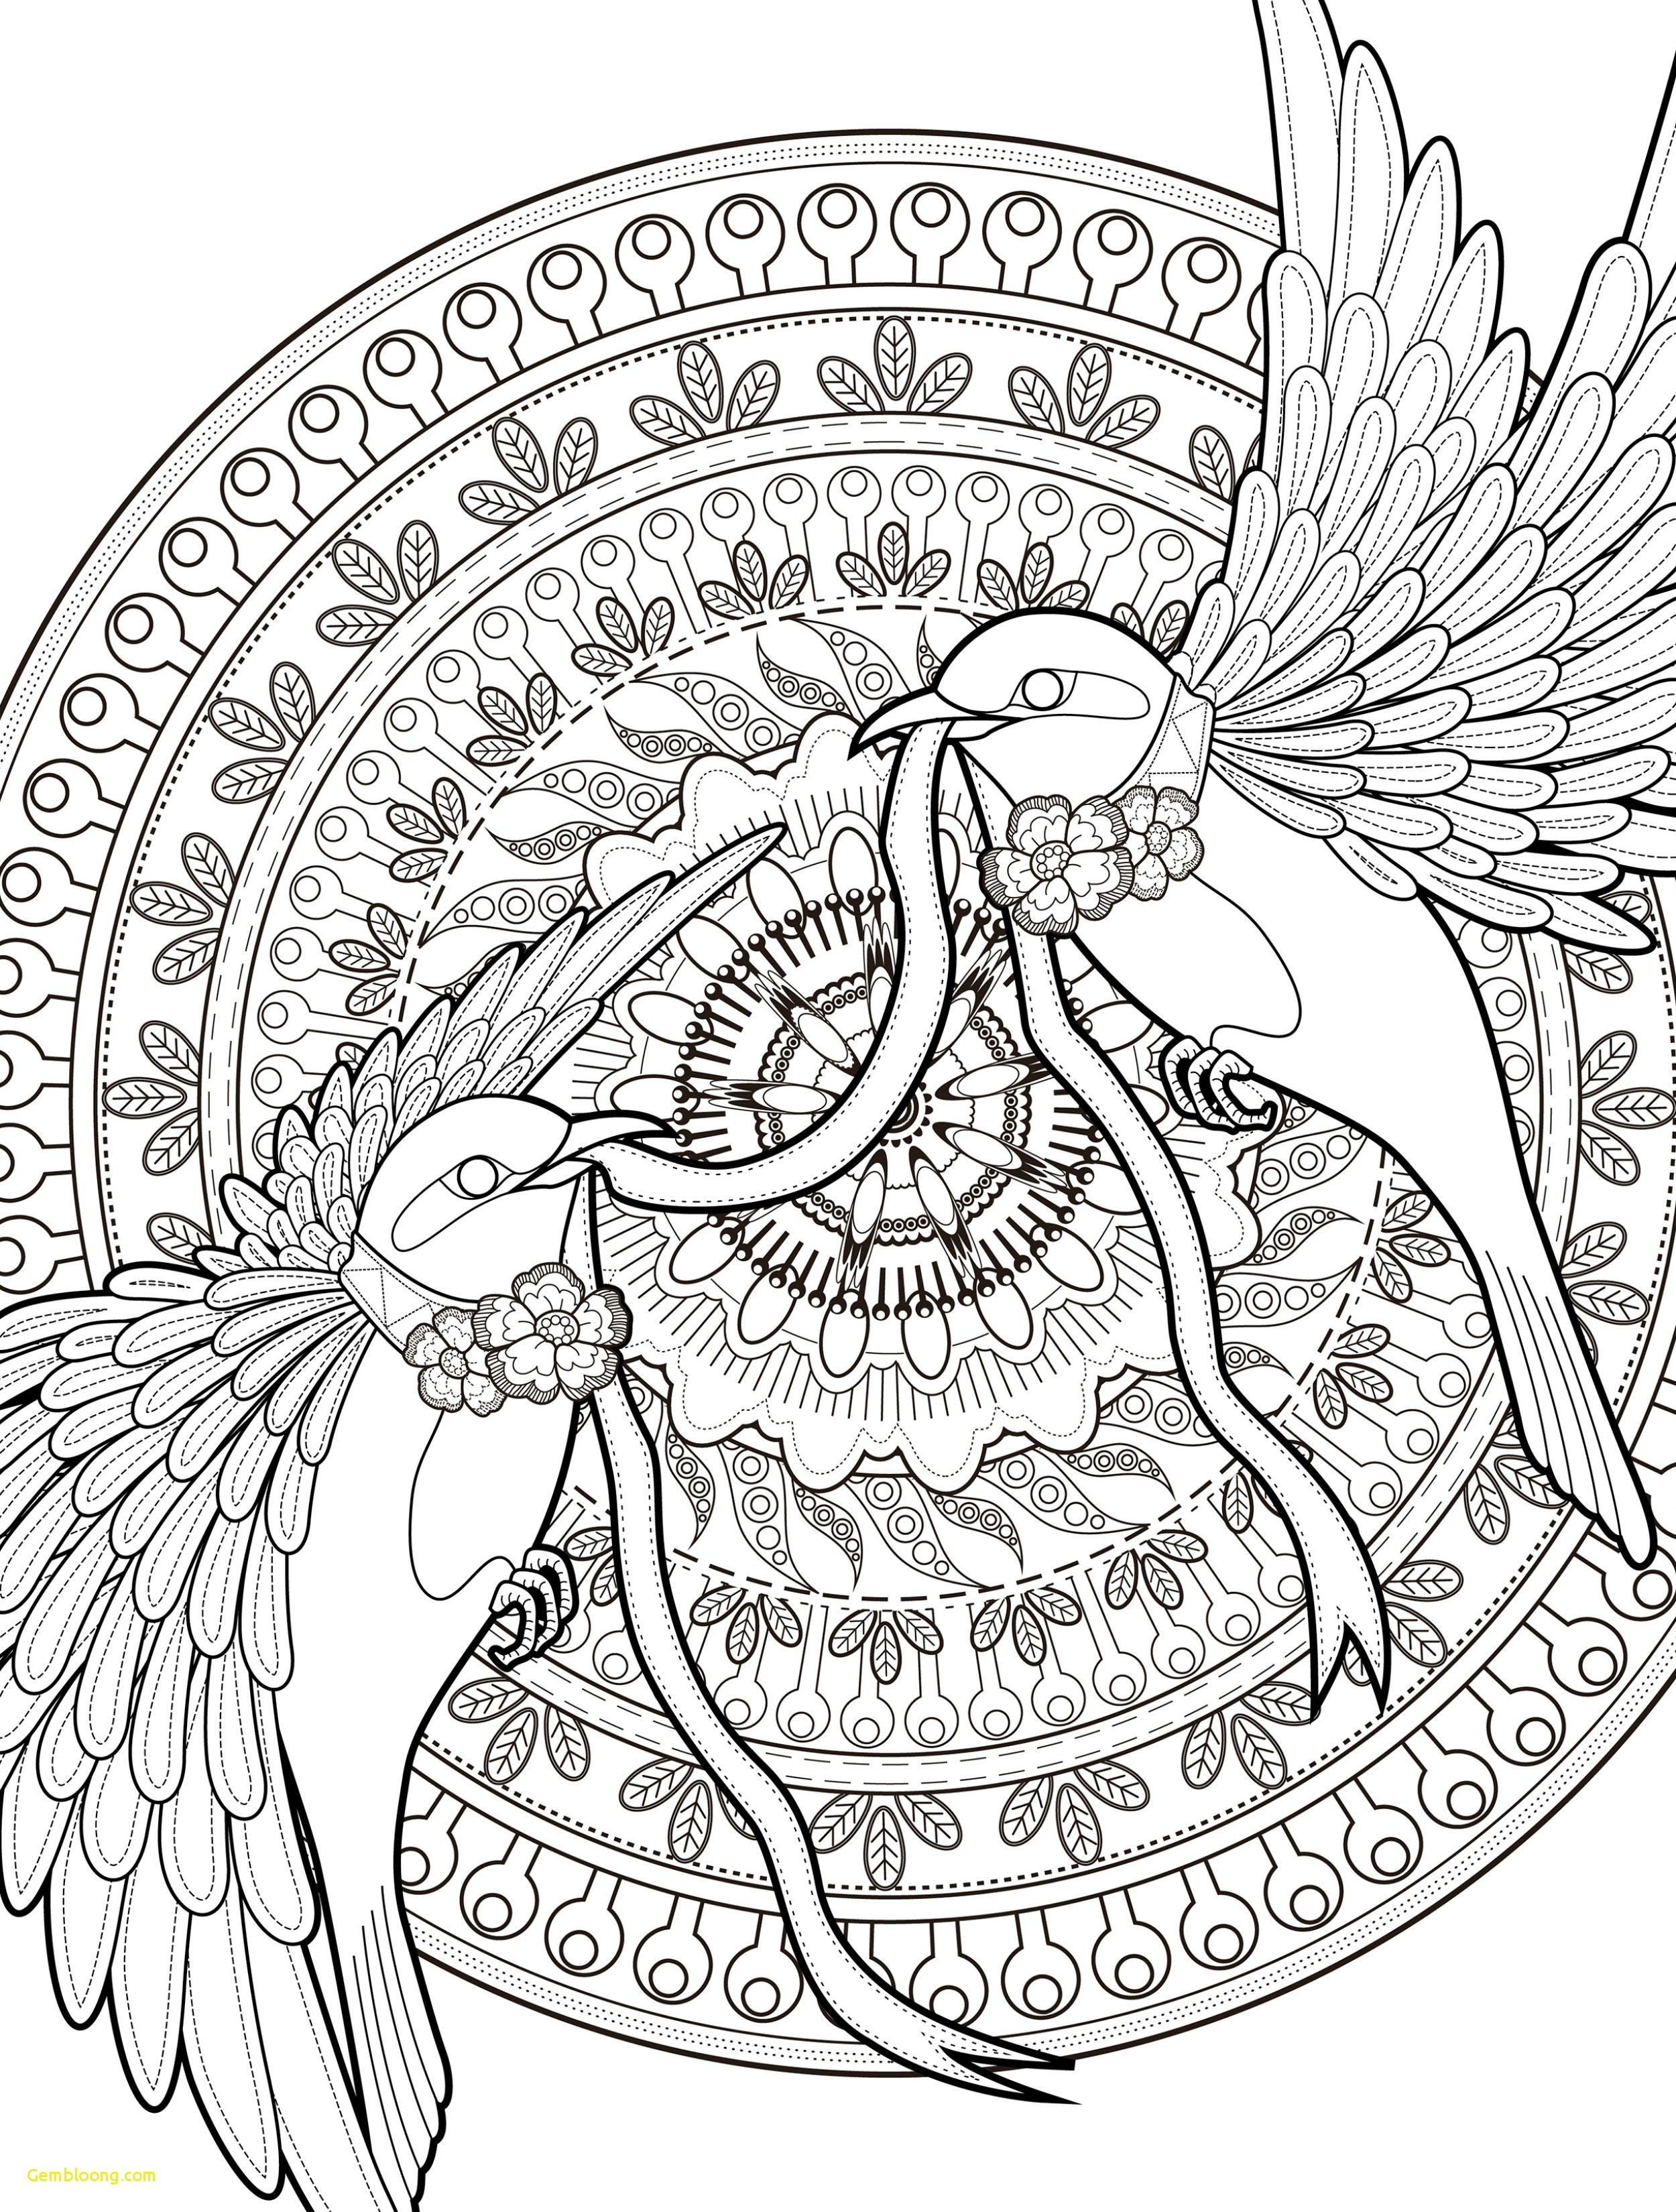 Hard Bird Coloring Pages at GetColorings.com | Free ...